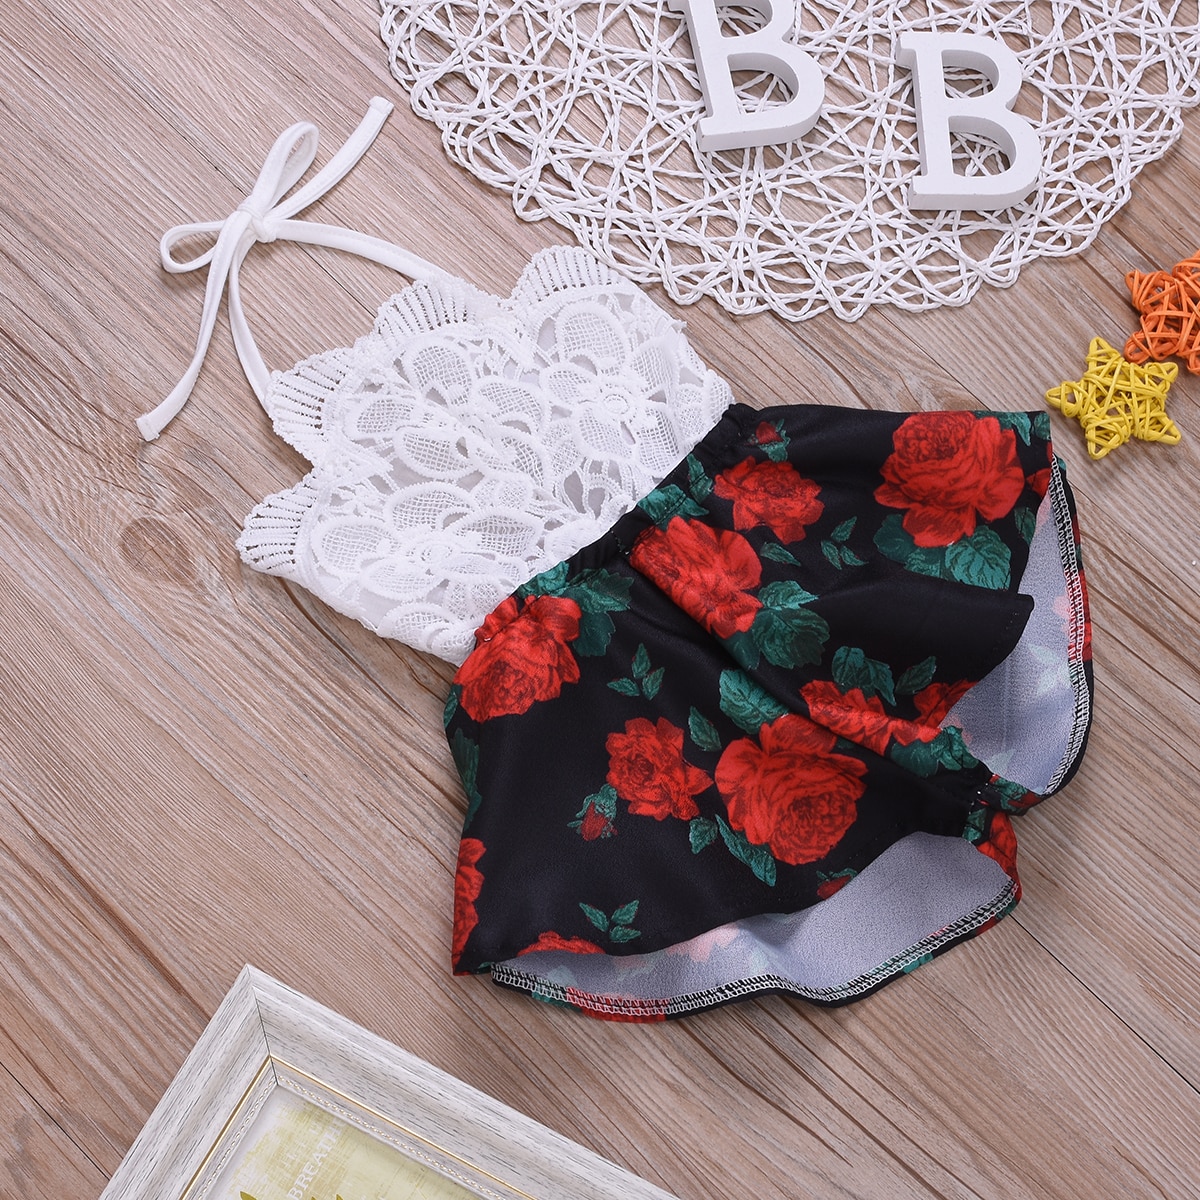 Newborn-Baby-Girl-Clothes-Sleeveless-Lace-Flower-Print-Strap-Romper-Jumpsuit-One-Piece-Outfit-Summer-Clothes-4